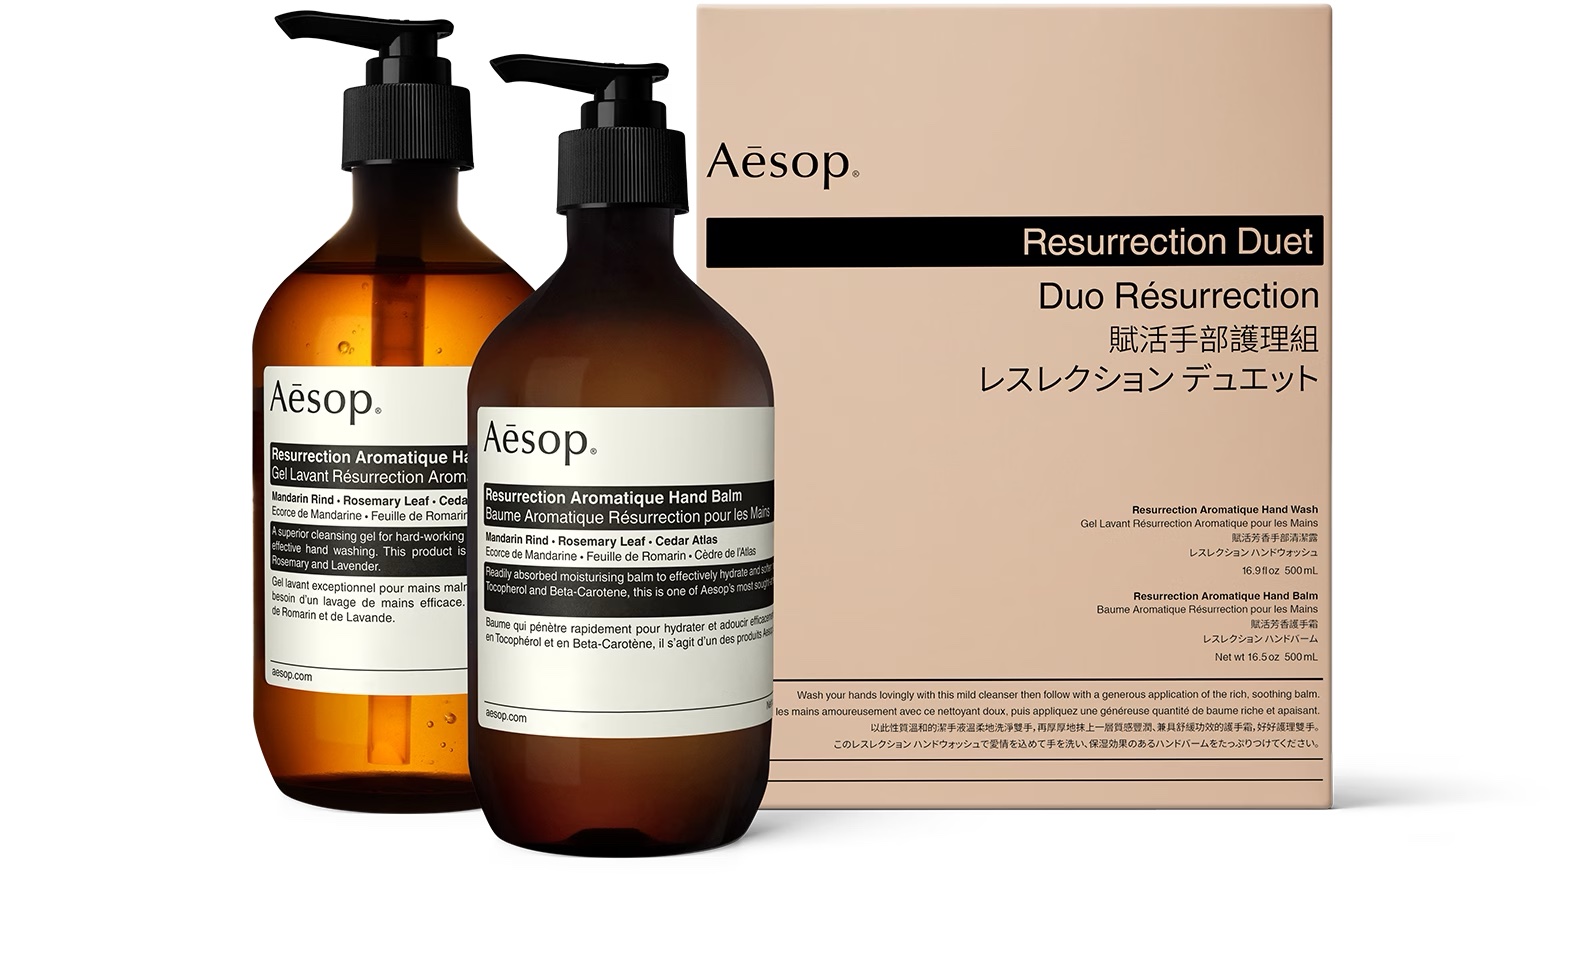 Aesop hand soap and hand cream gift set with box